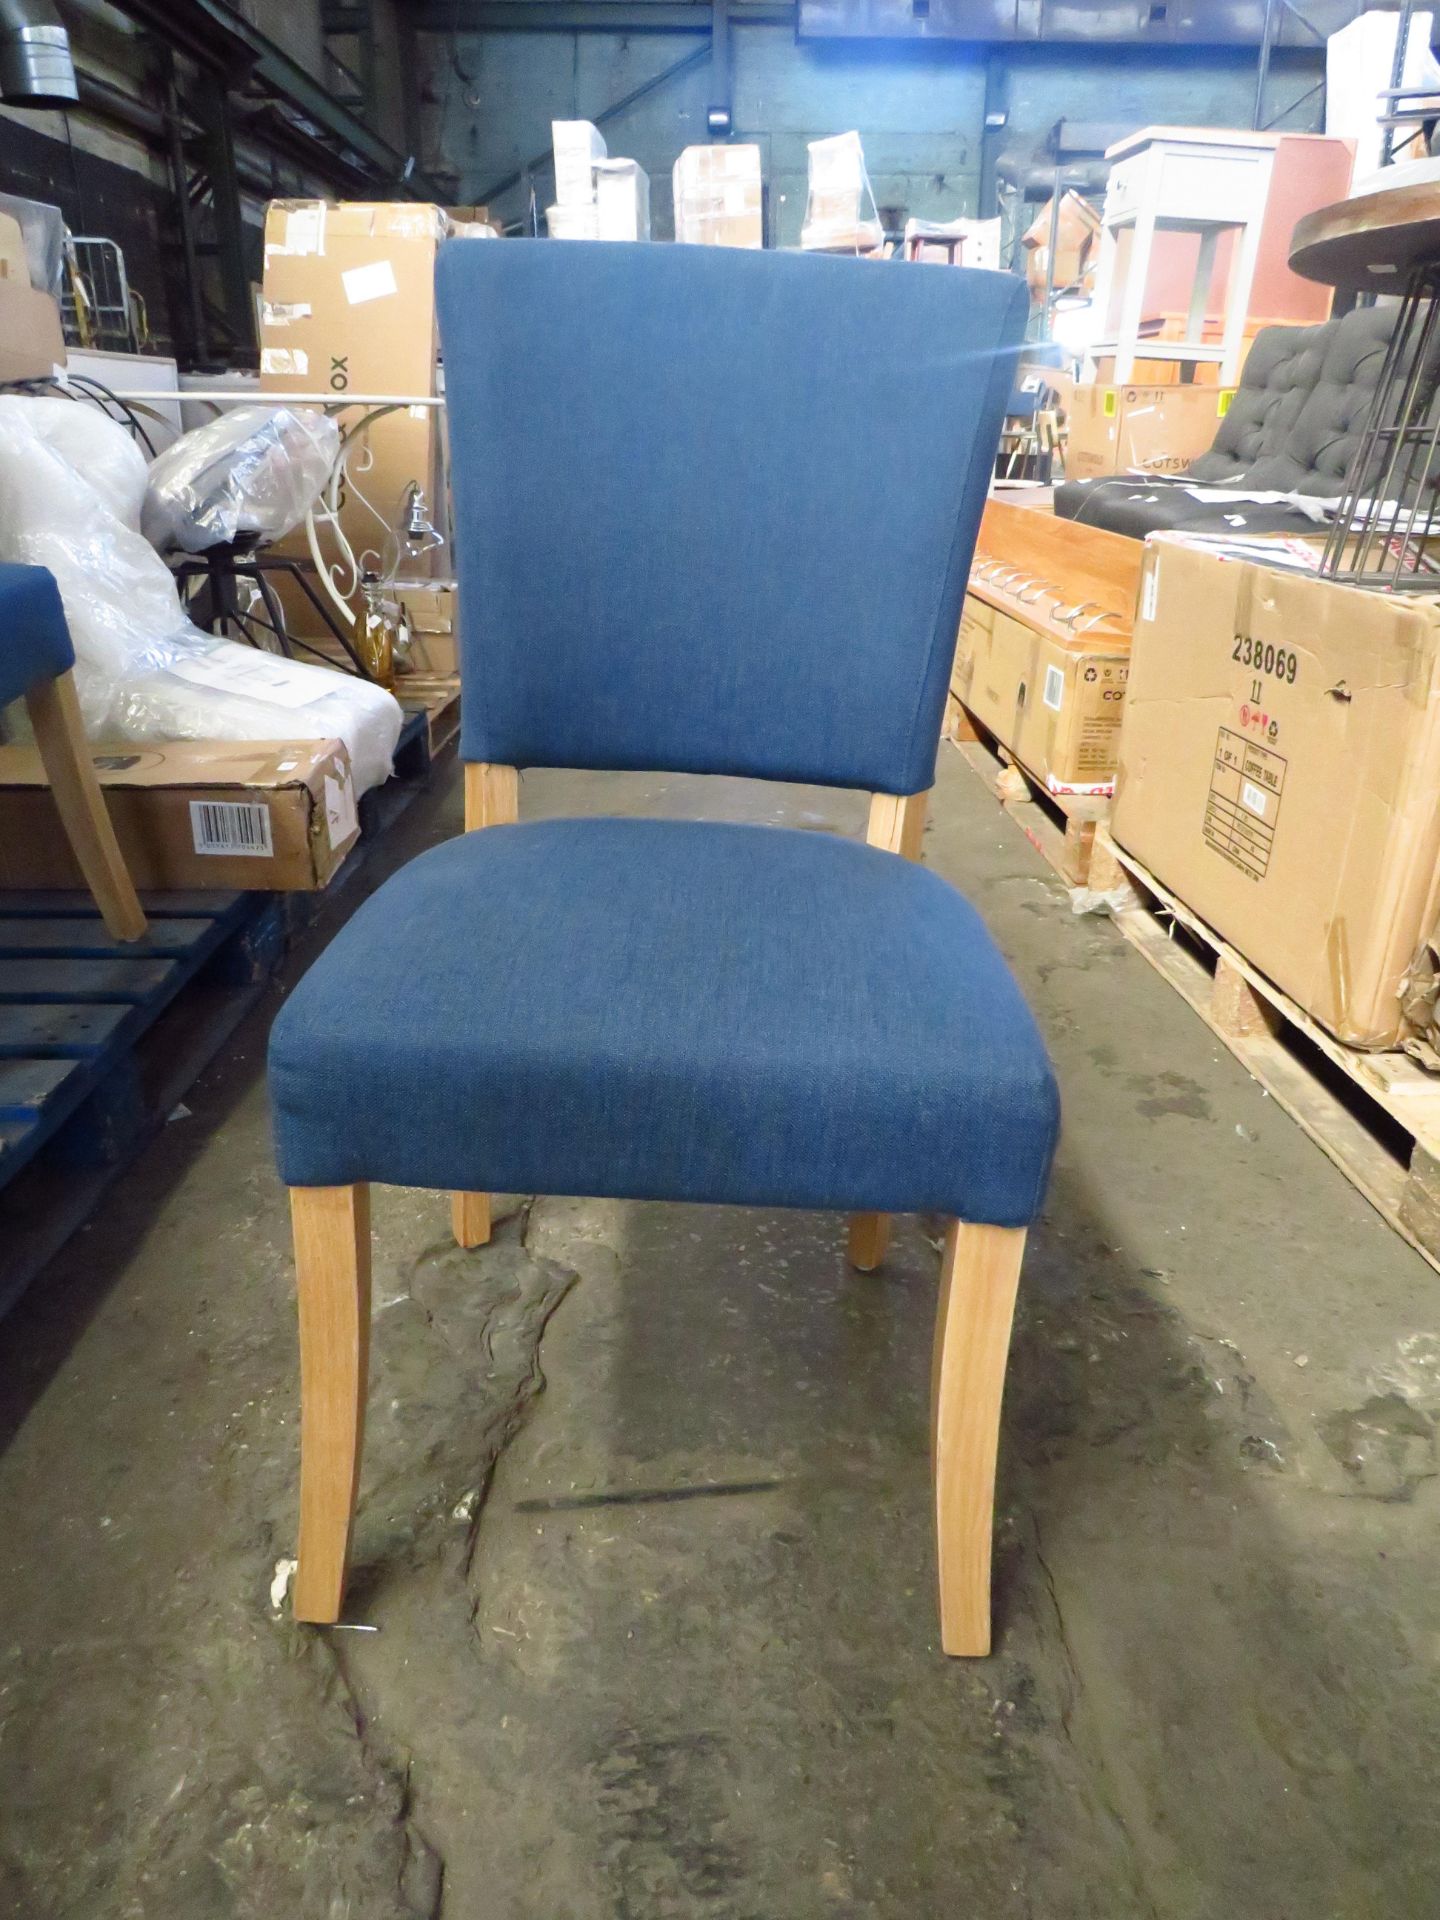 Cotswold Company Bluebell Upholstered Dining Chair - Stone 1 RRP Â£320.00 - This item looks to be in